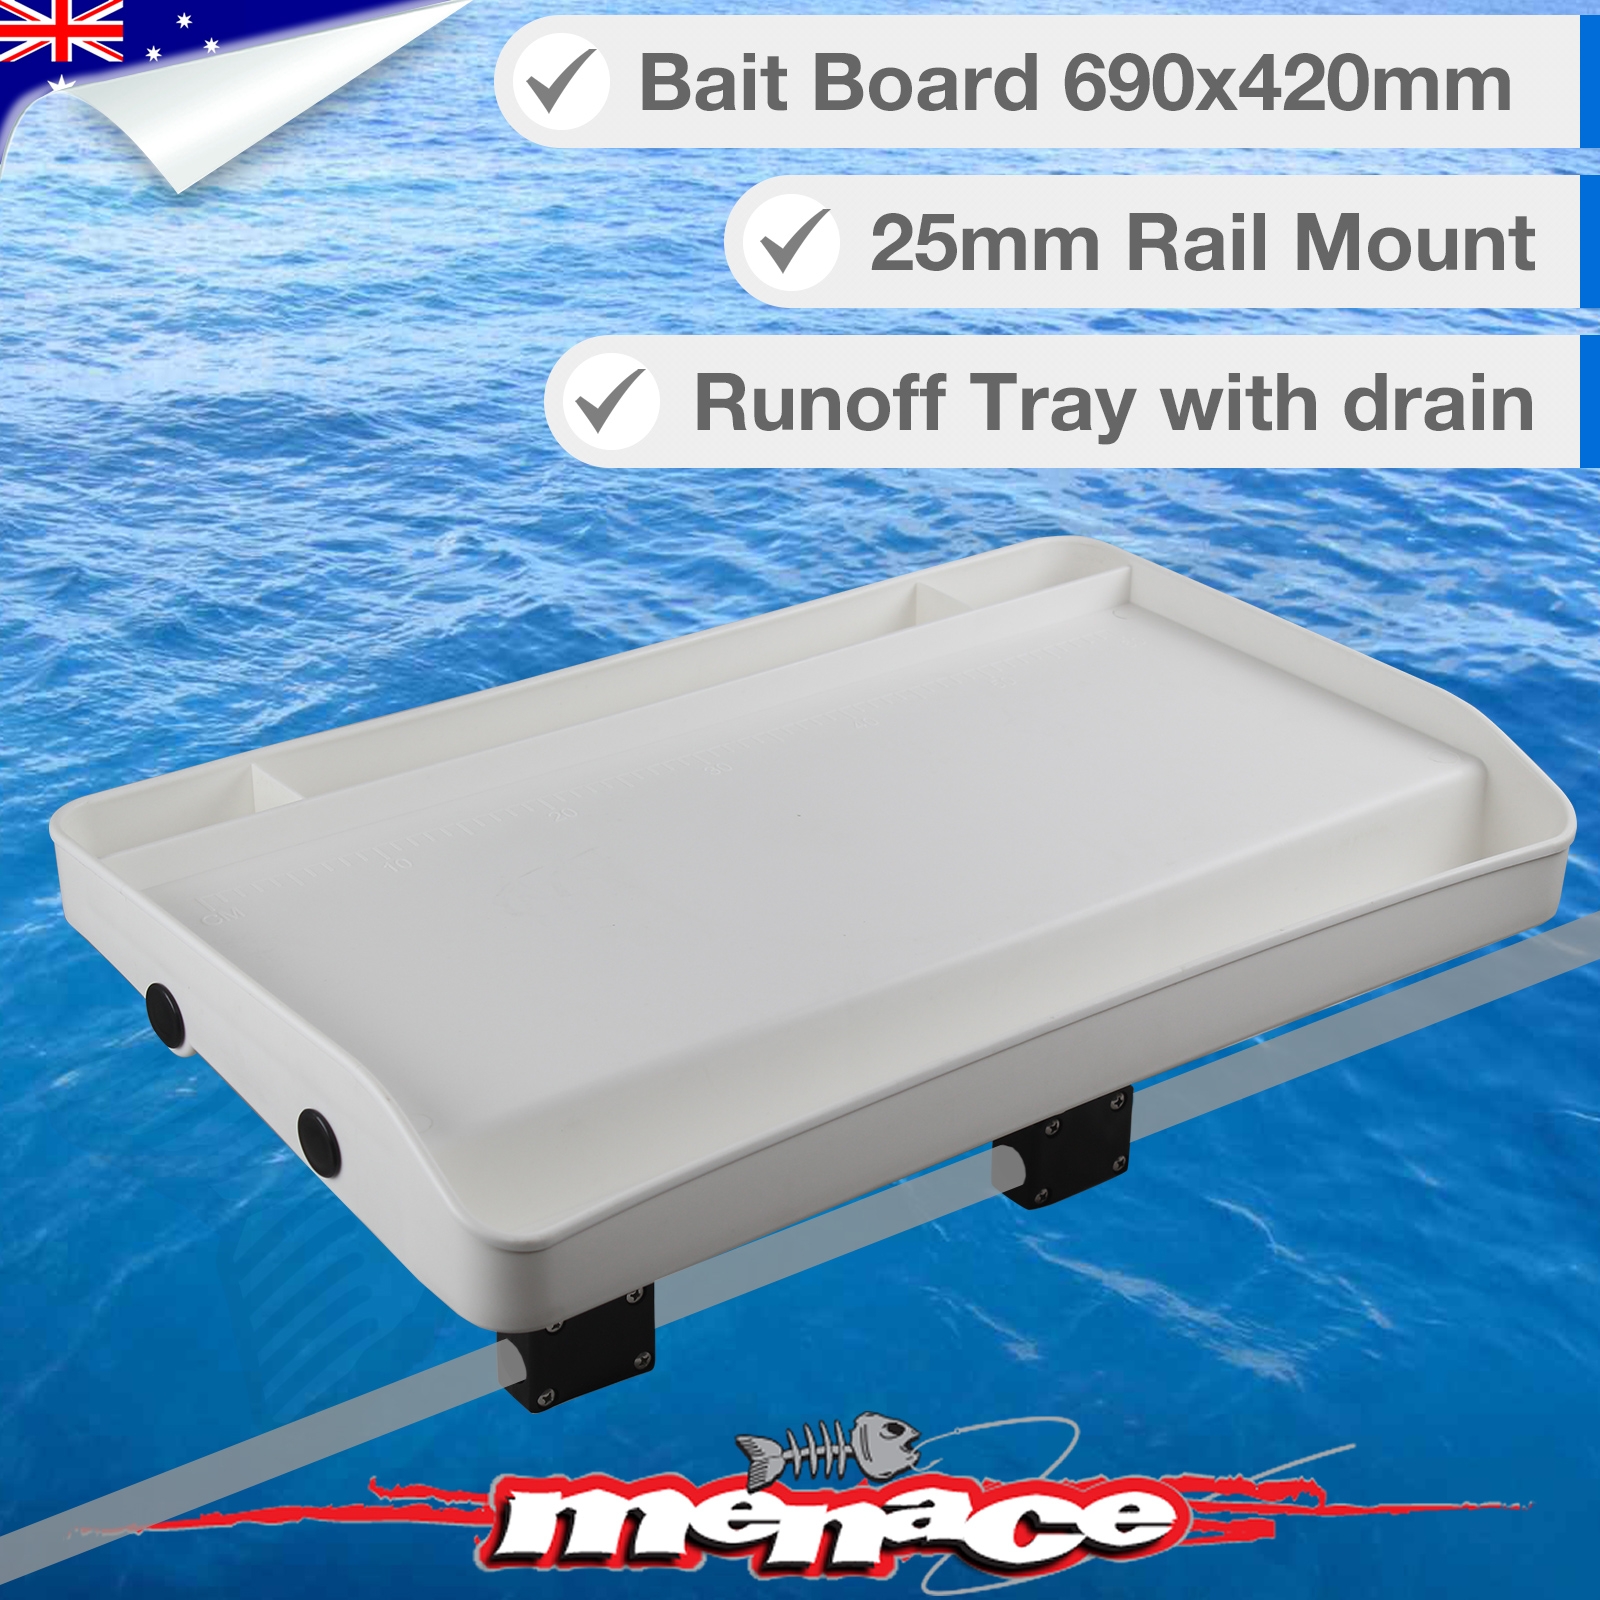 EXTRA LARGE Rail Mount BAIT BOARD Boat Fishing Cutting Filleting Knife